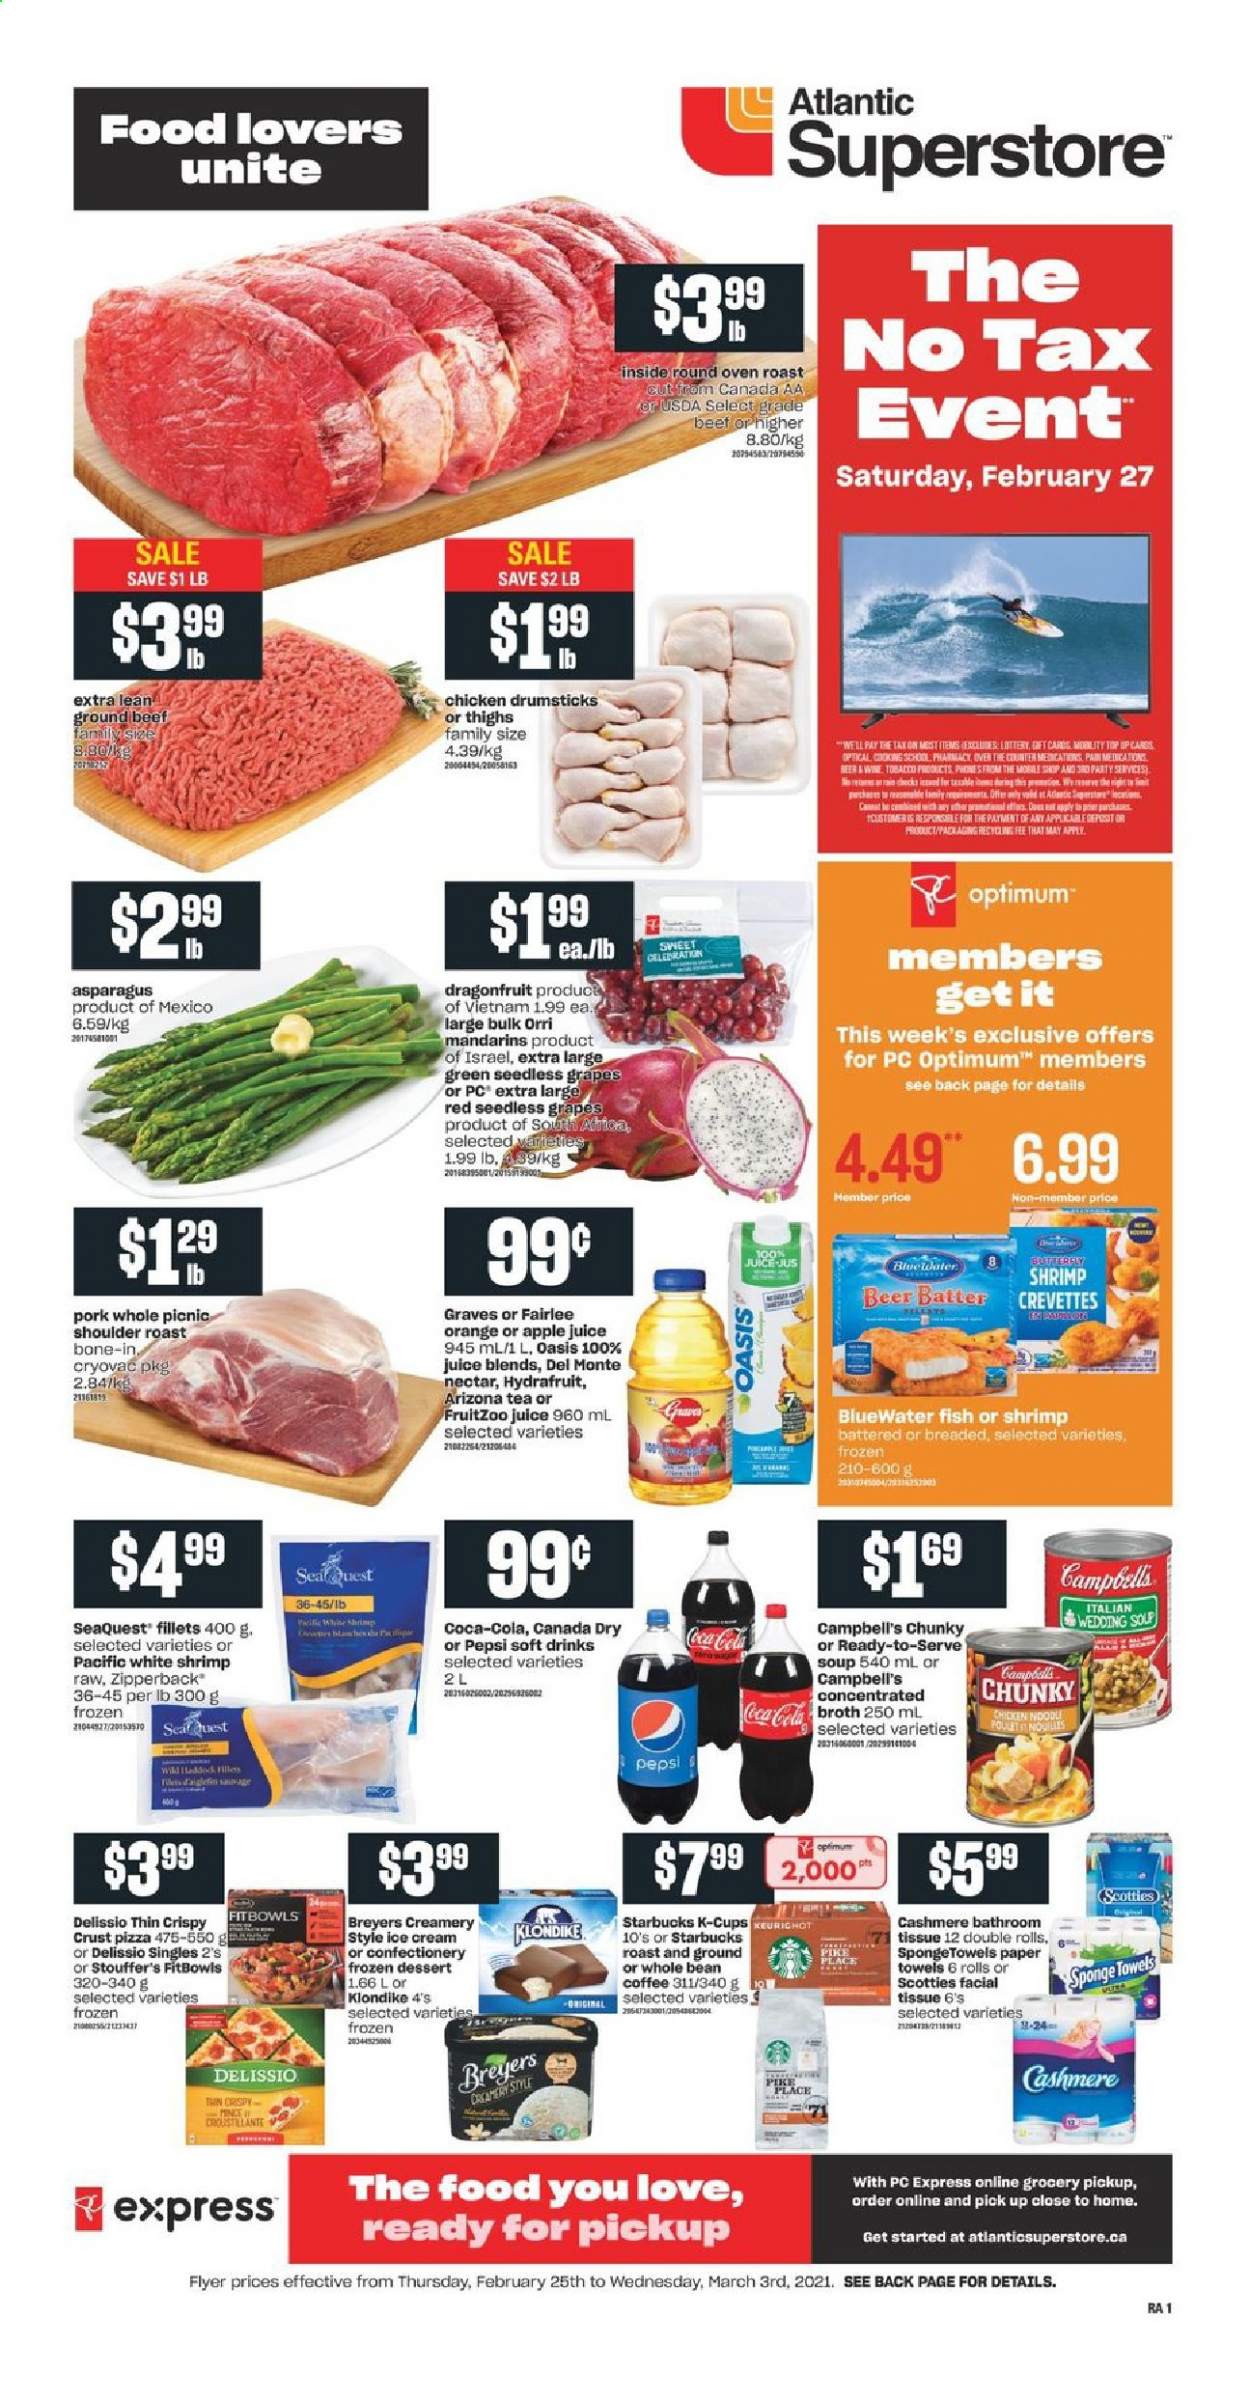 thumbnail - Atlantic Superstore Flyer - February 25, 2021 - March 03, 2021 - Sales products - asparagus, grapes, mandarines, seedless grapes, fish, shrimps, Campbell's, pizza, soup, ice cream, Stouffer's, broth, apple juice, Canada Dry, Coca-Cola, Pepsi, juice, soft drink, AriZona, tea, coffee, coffee capsules, Starbucks, K-Cups, beer, chicken drumsticks, chicken, beef meat, ground beef, tissues, kitchen towels, paper towels, Optimum. Page 1.